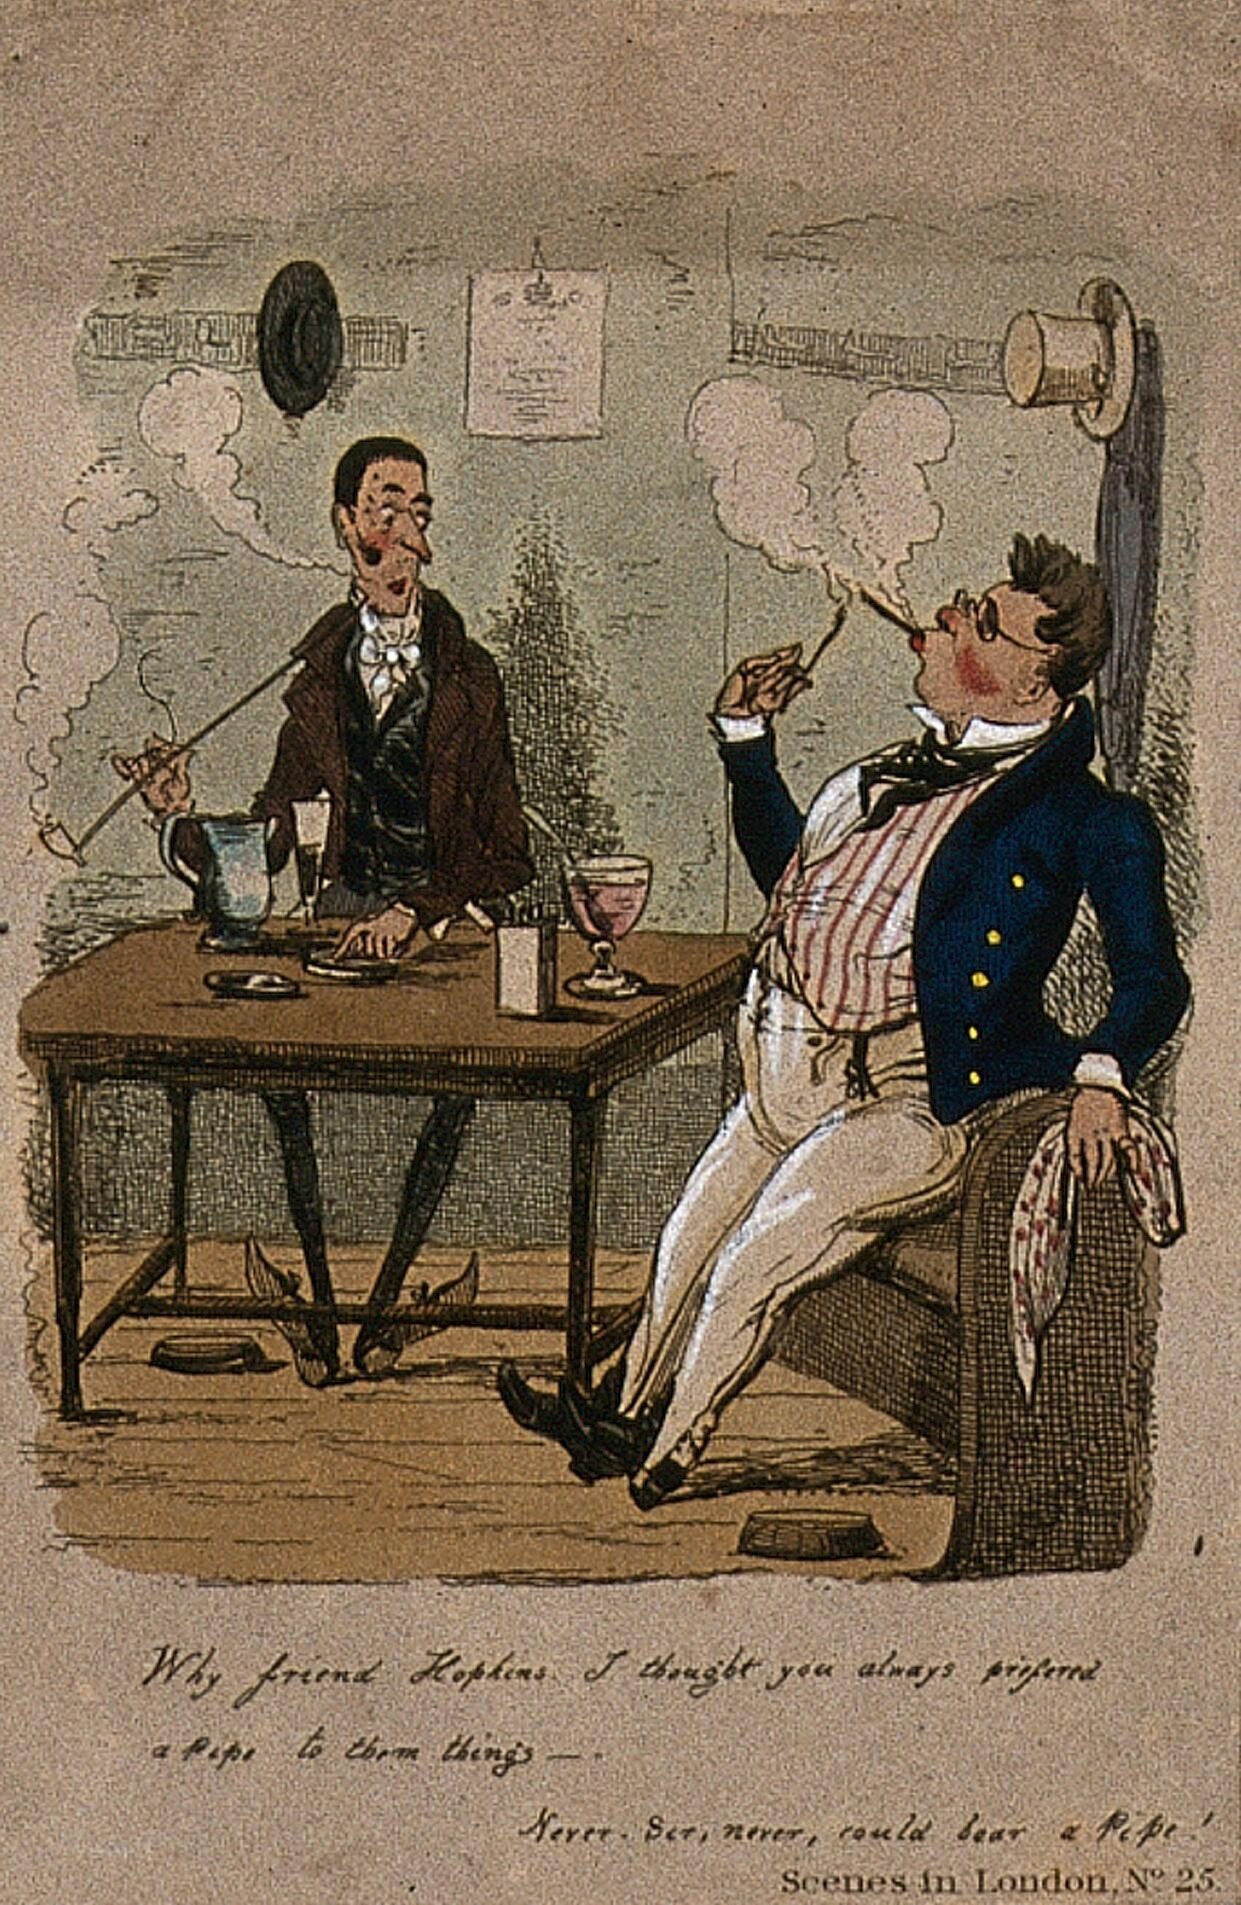 Colour illustration featuring two men sitting at a table, smoking. One man is smoking a pipe and the other is smoking a cigarette. There are drinks on the table, and the men's hats are hung up on the wall behind them. Text at the bottom of the image reads: "Why, friend Hopkins, I thought you always preferred a pipe to them things. Never Sir, never, could bear a pipe. Scenes in London No. 25."